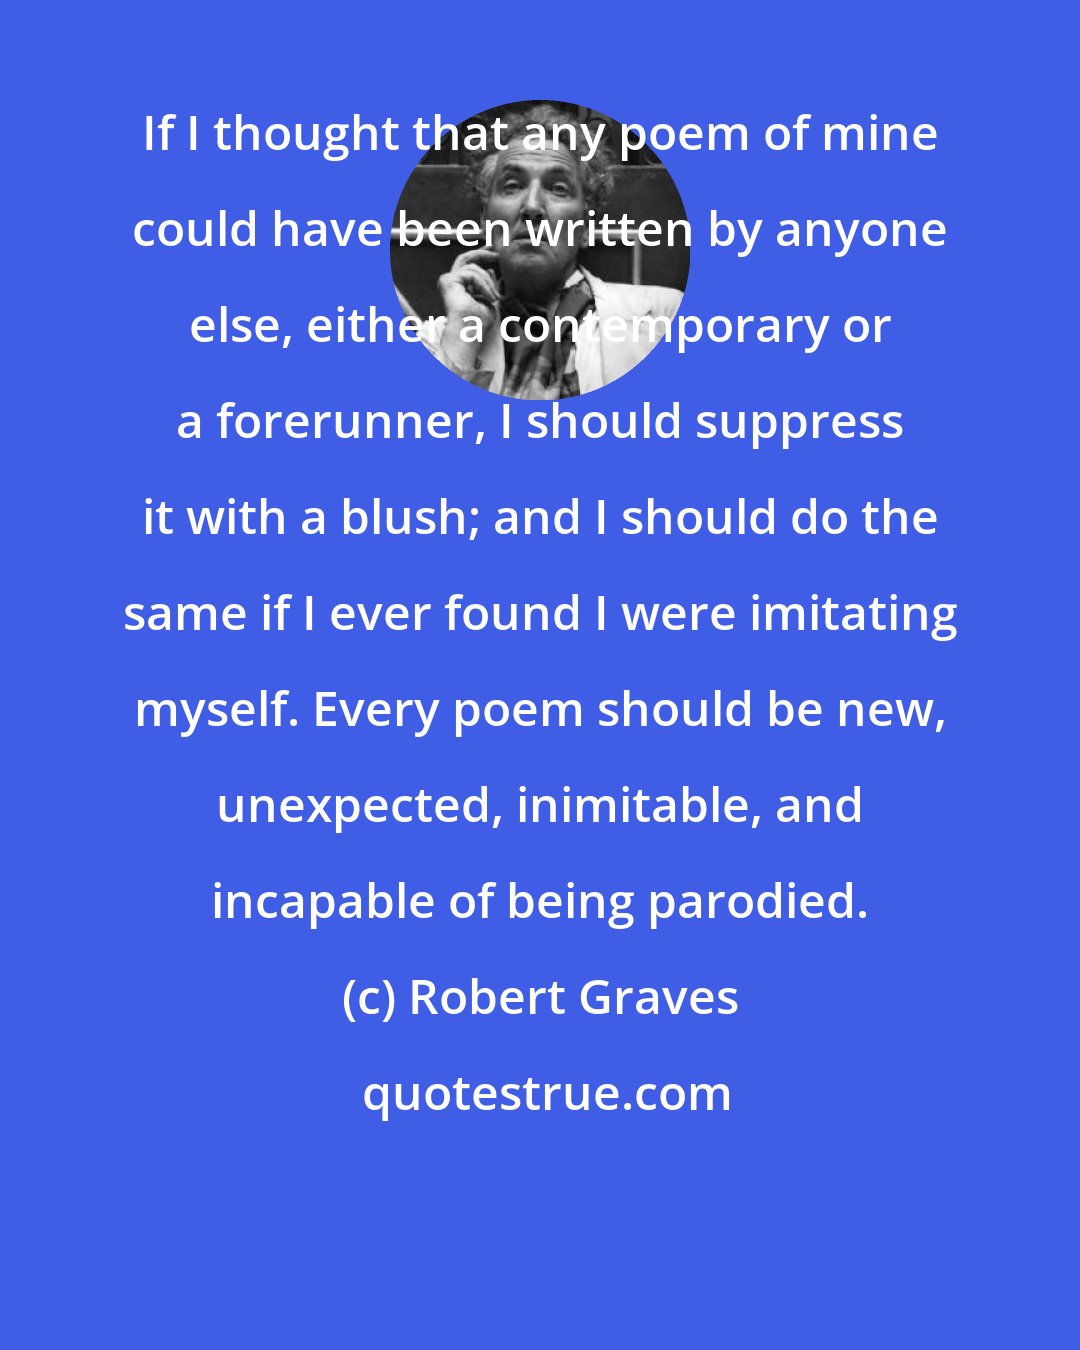 Robert Graves: If I thought that any poem of mine could have been written by anyone else, either a contemporary or a forerunner, I should suppress it with a blush; and I should do the same if I ever found I were imitating myself. Every poem should be new, unexpected, inimitable, and incapable of being parodied.